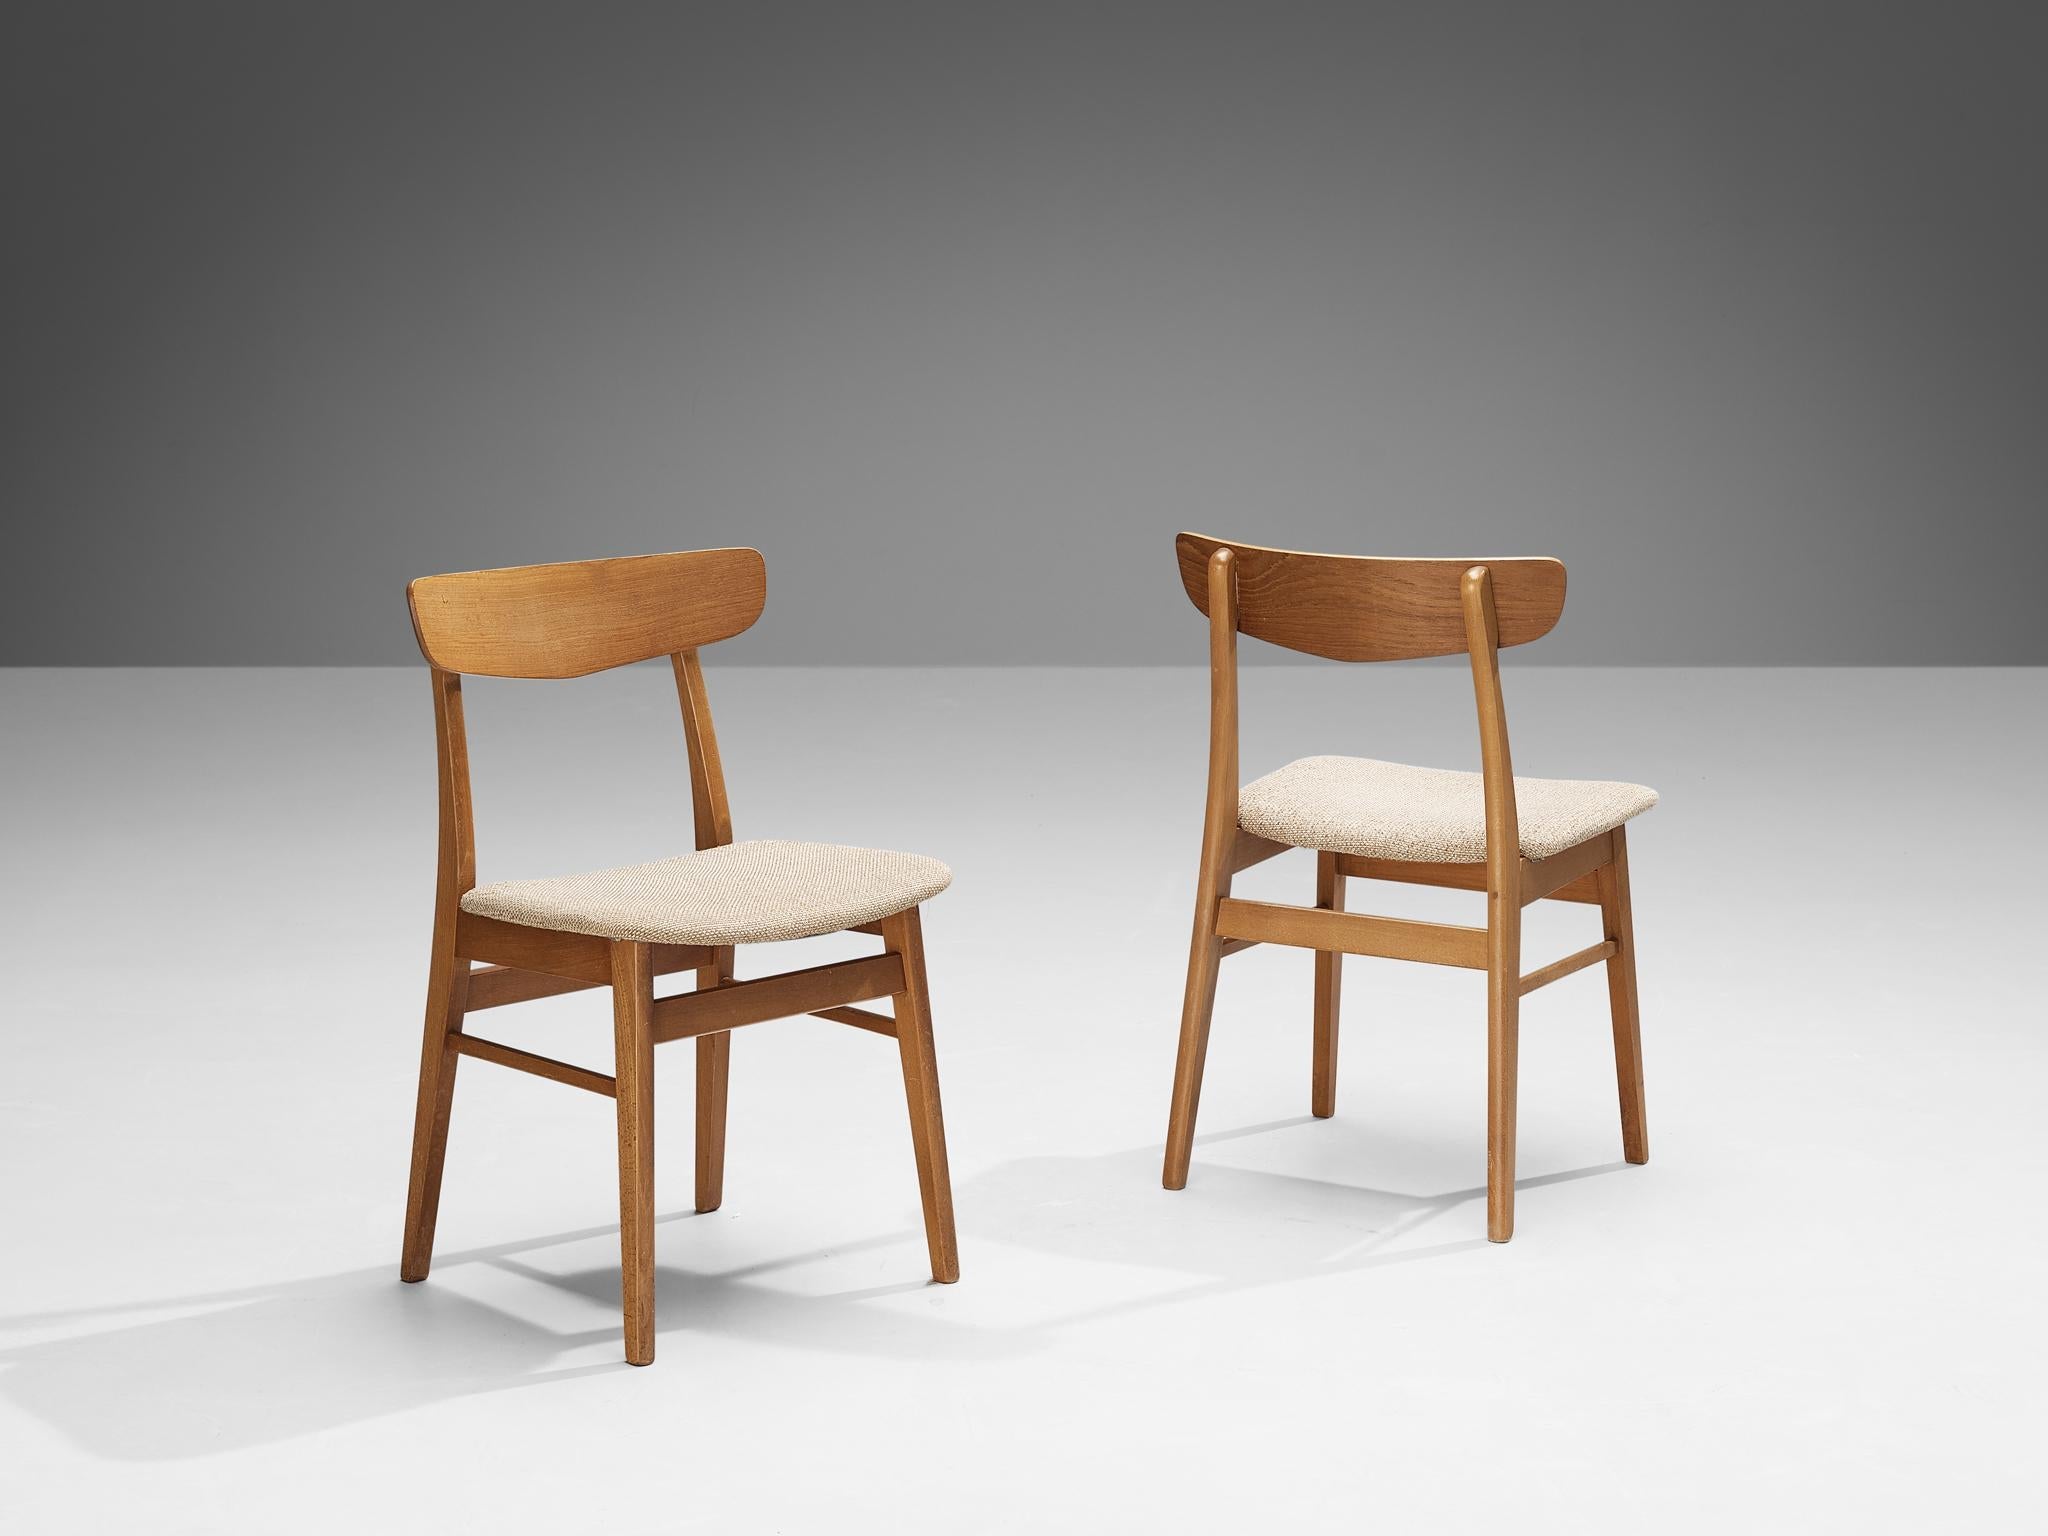 Danish Dining Chairs in Teak and Beige Upholstery